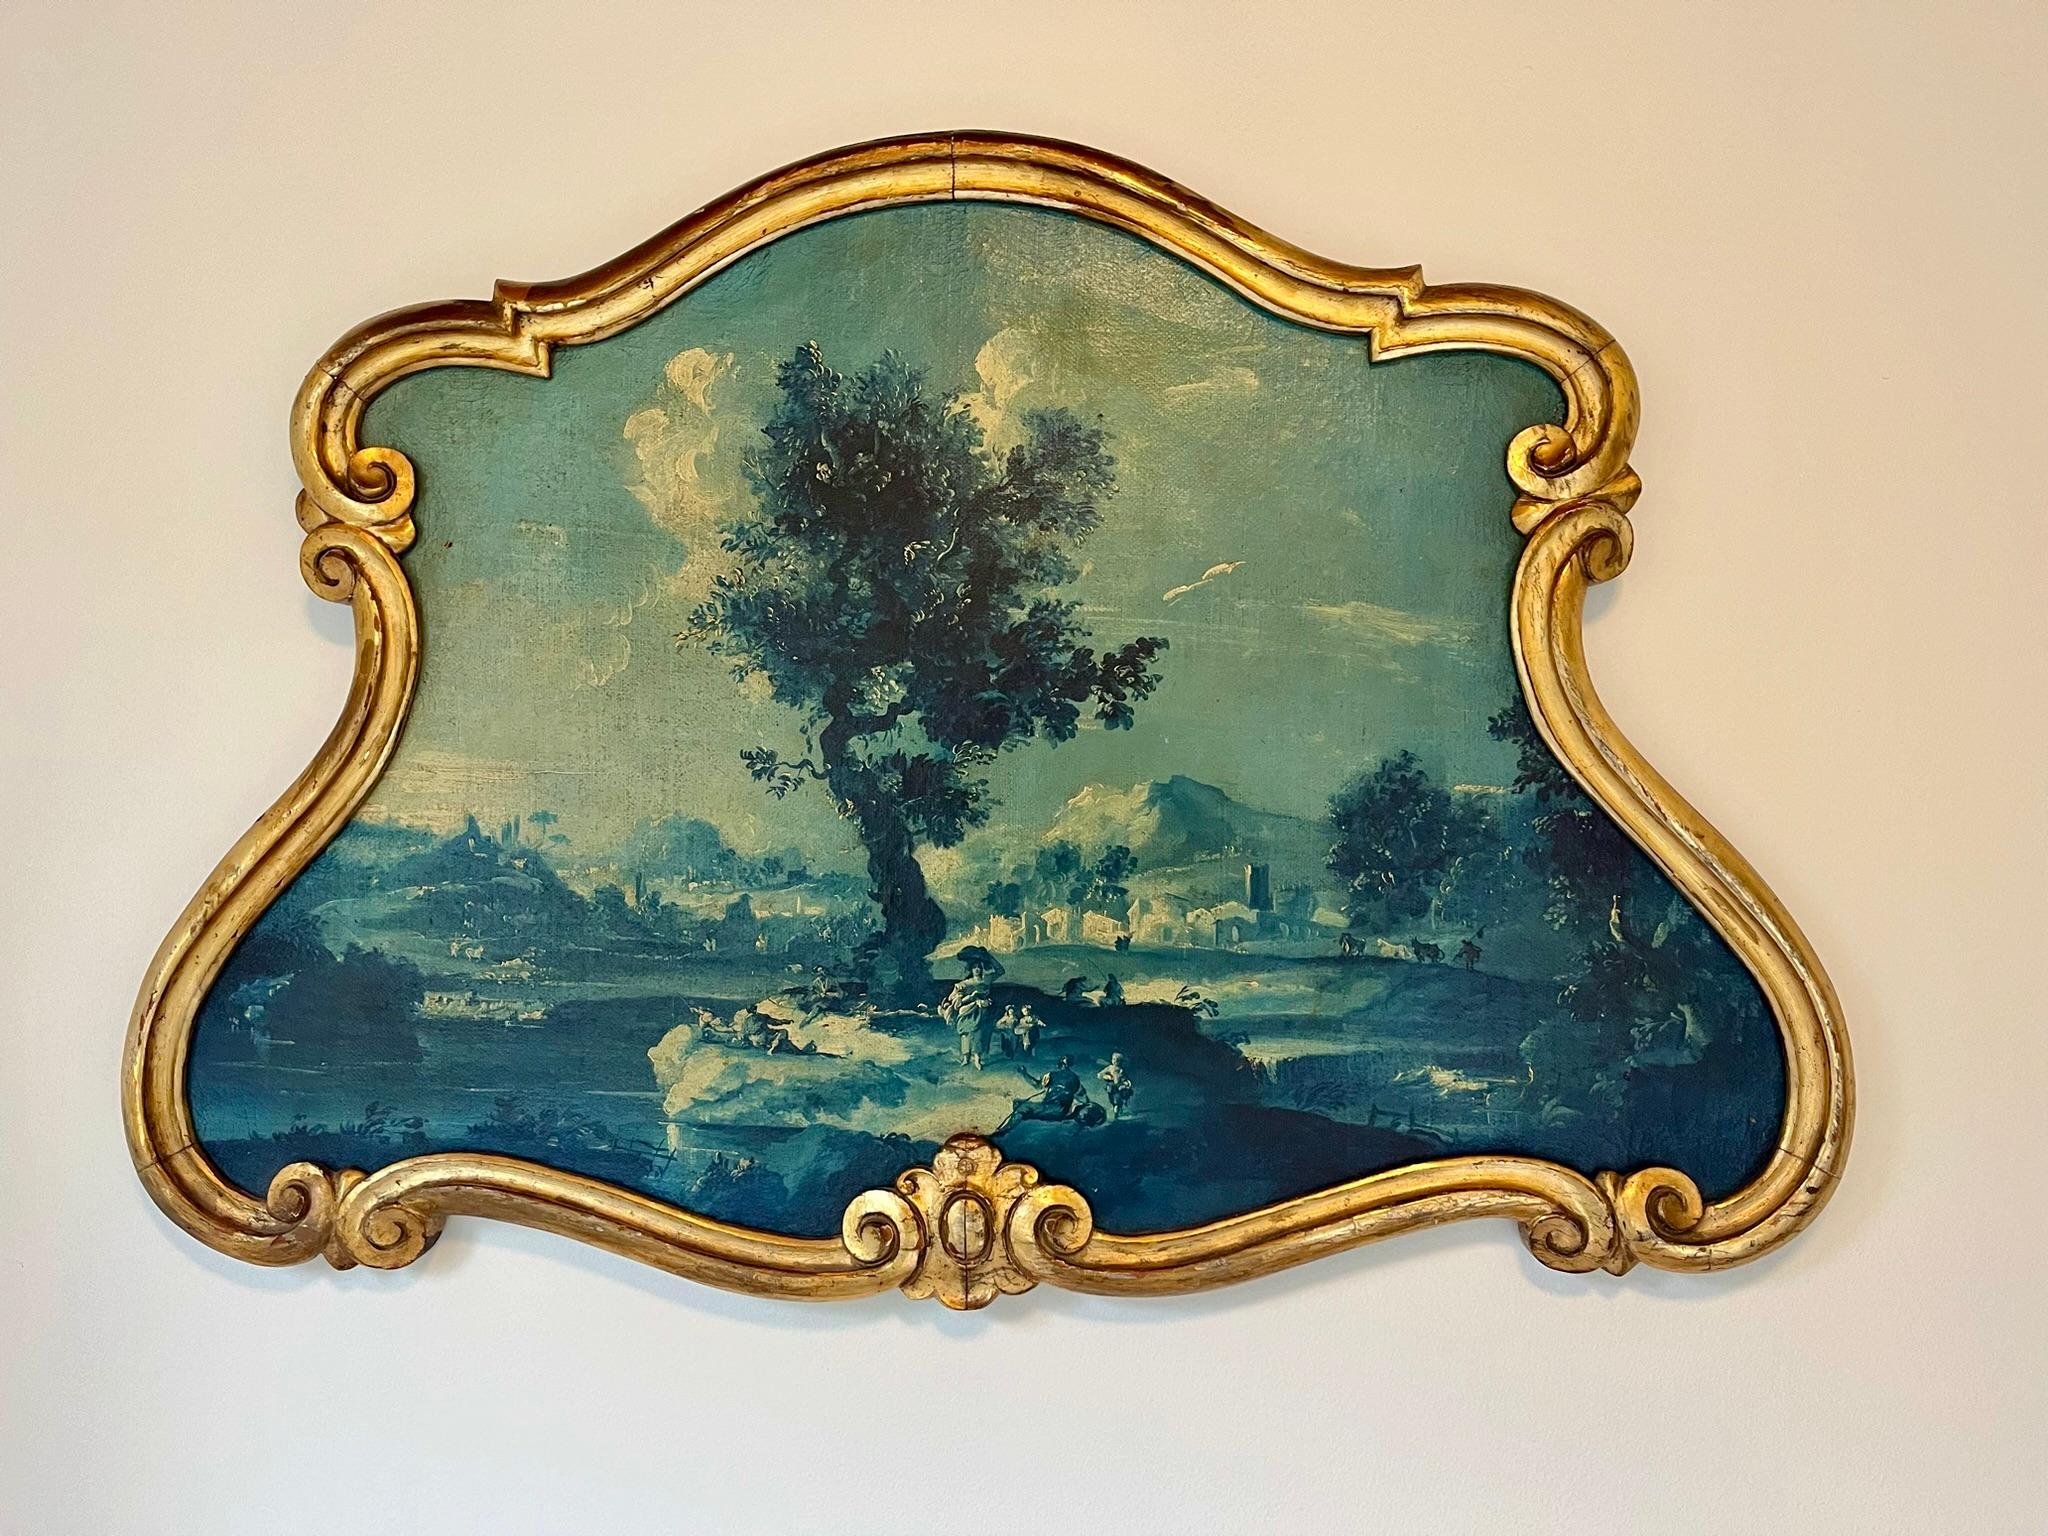 An antique giltwood encased French landscape as an overdoor . Carved French giltwood frame of cartouche form around a blue ‘ en grisaille ‘  landscape . 

Possibly part of a room boiserie originally and later converted as a hanging . Meant to hang